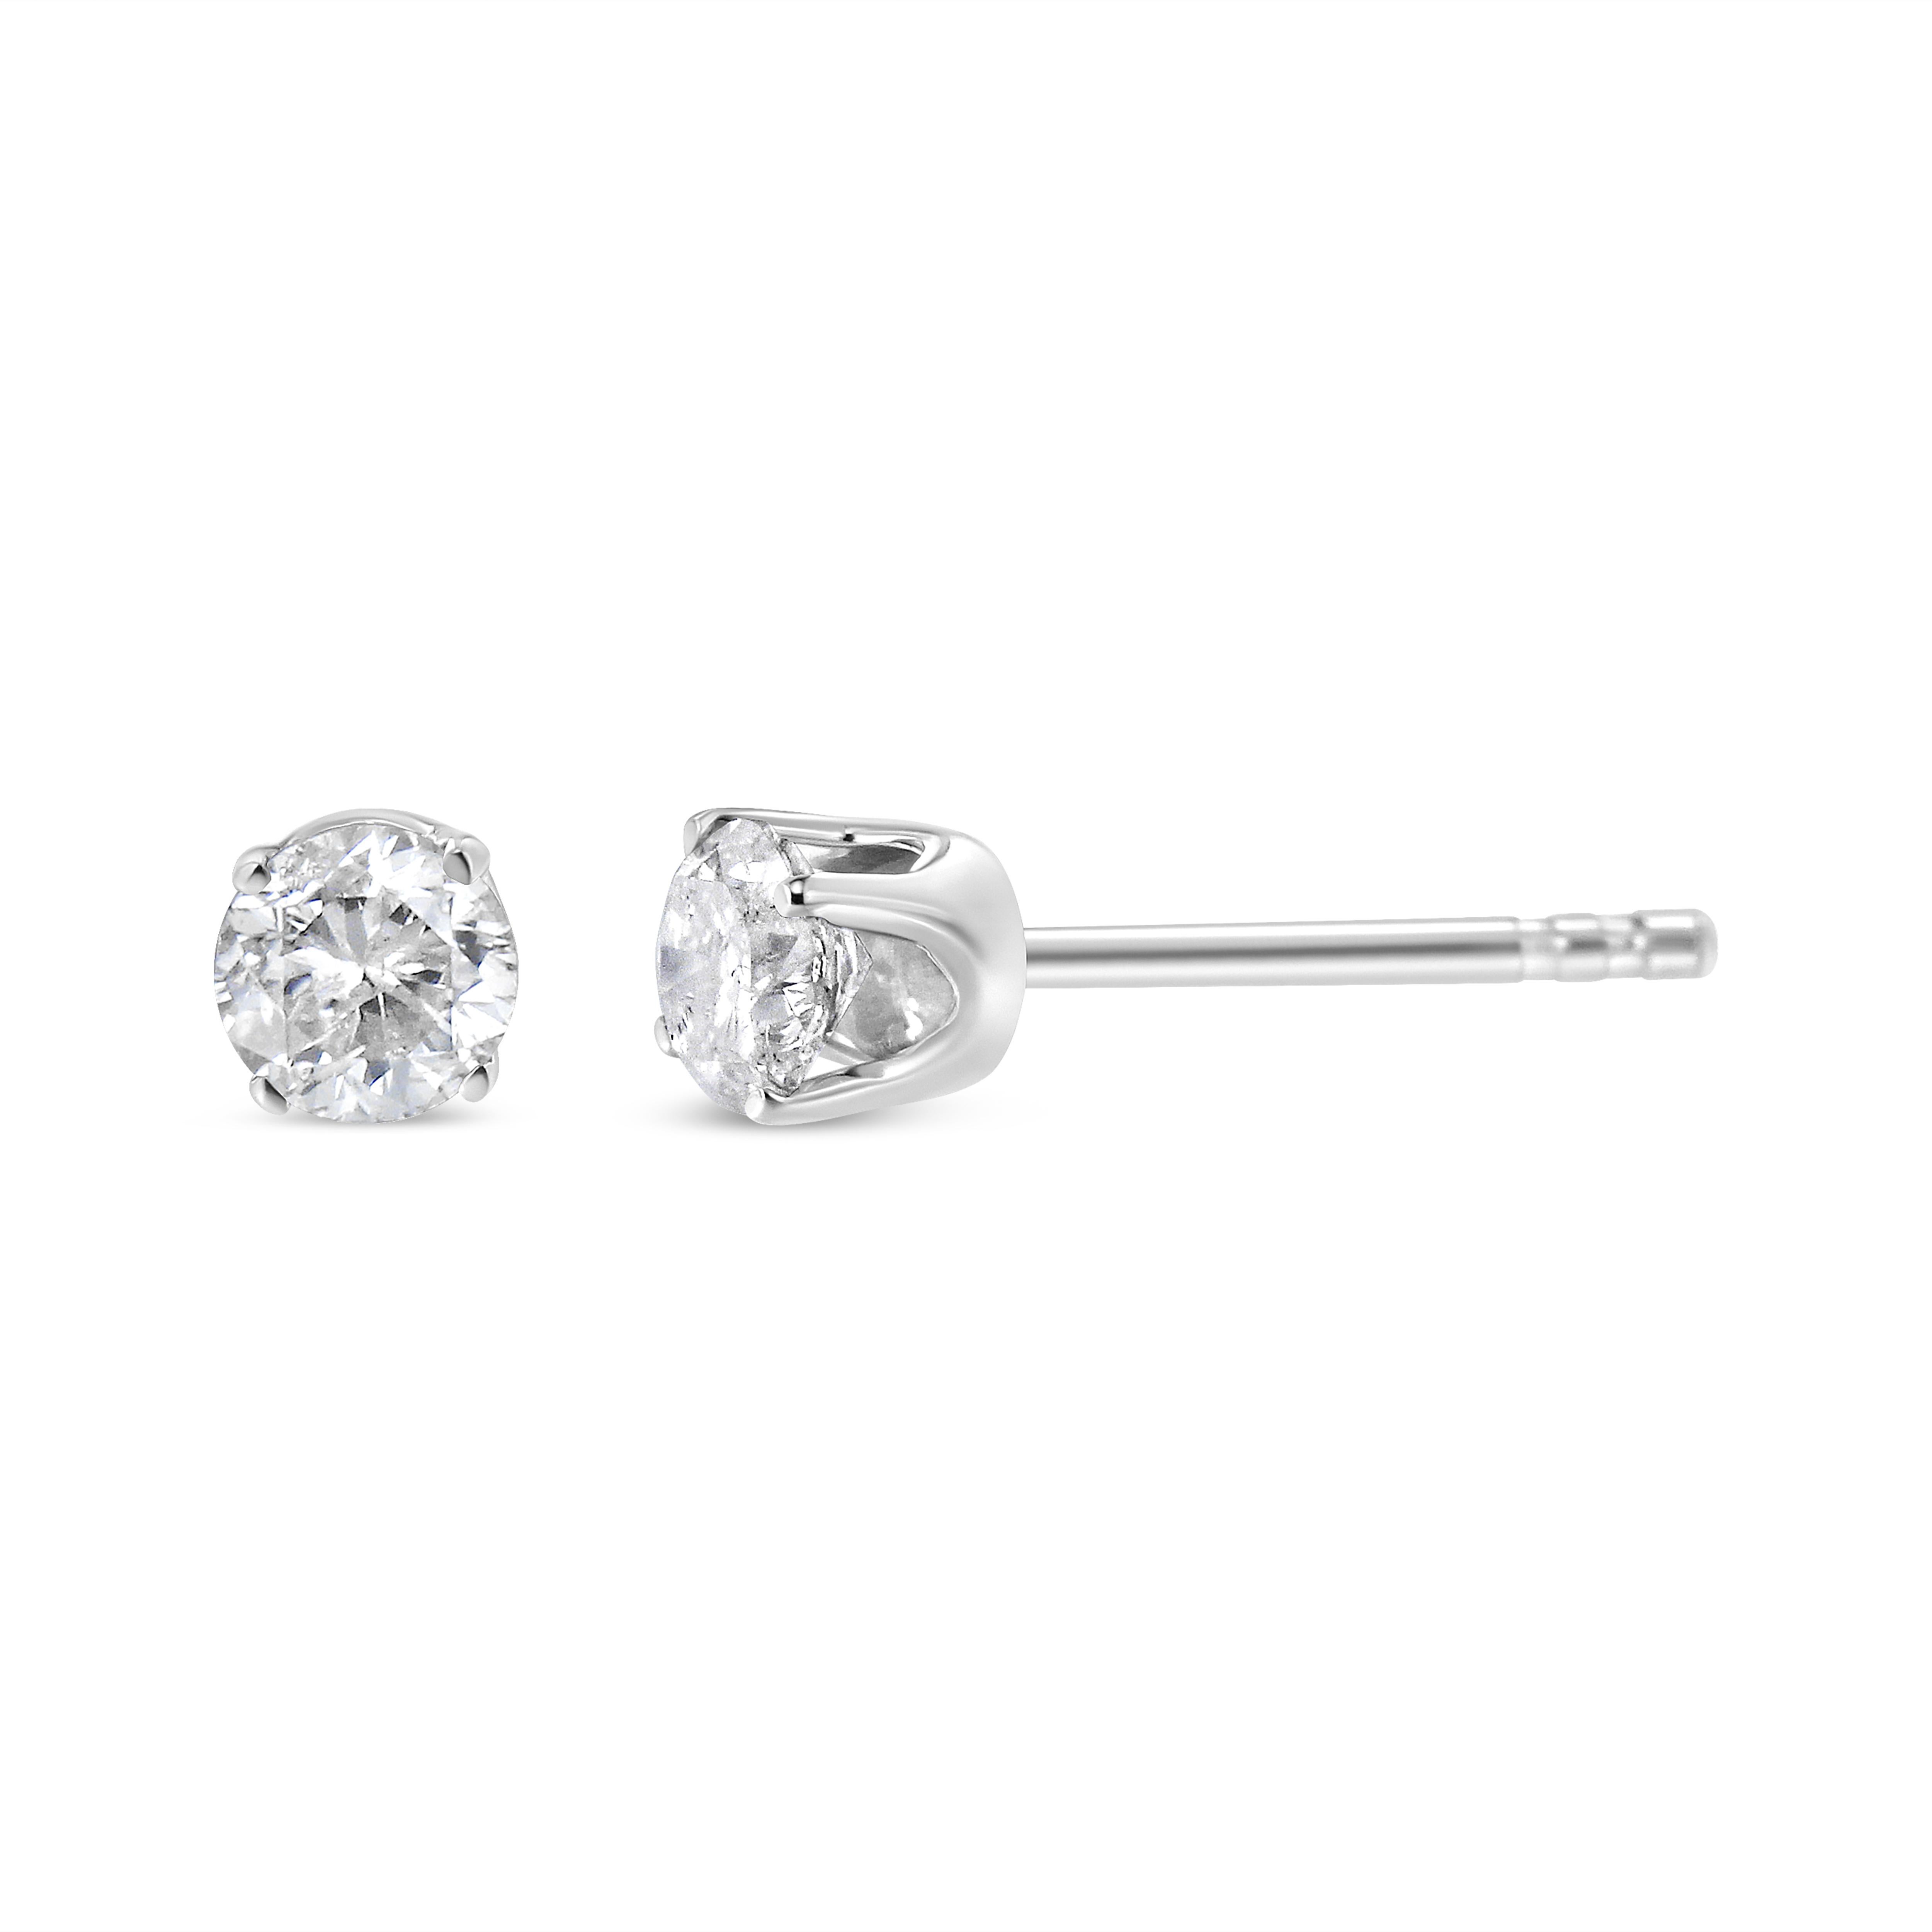 Contemporary AGS Certified 14K White Gold 1.0 Carat Round-Cut Diamond Push Back Stud Earrings For Sale